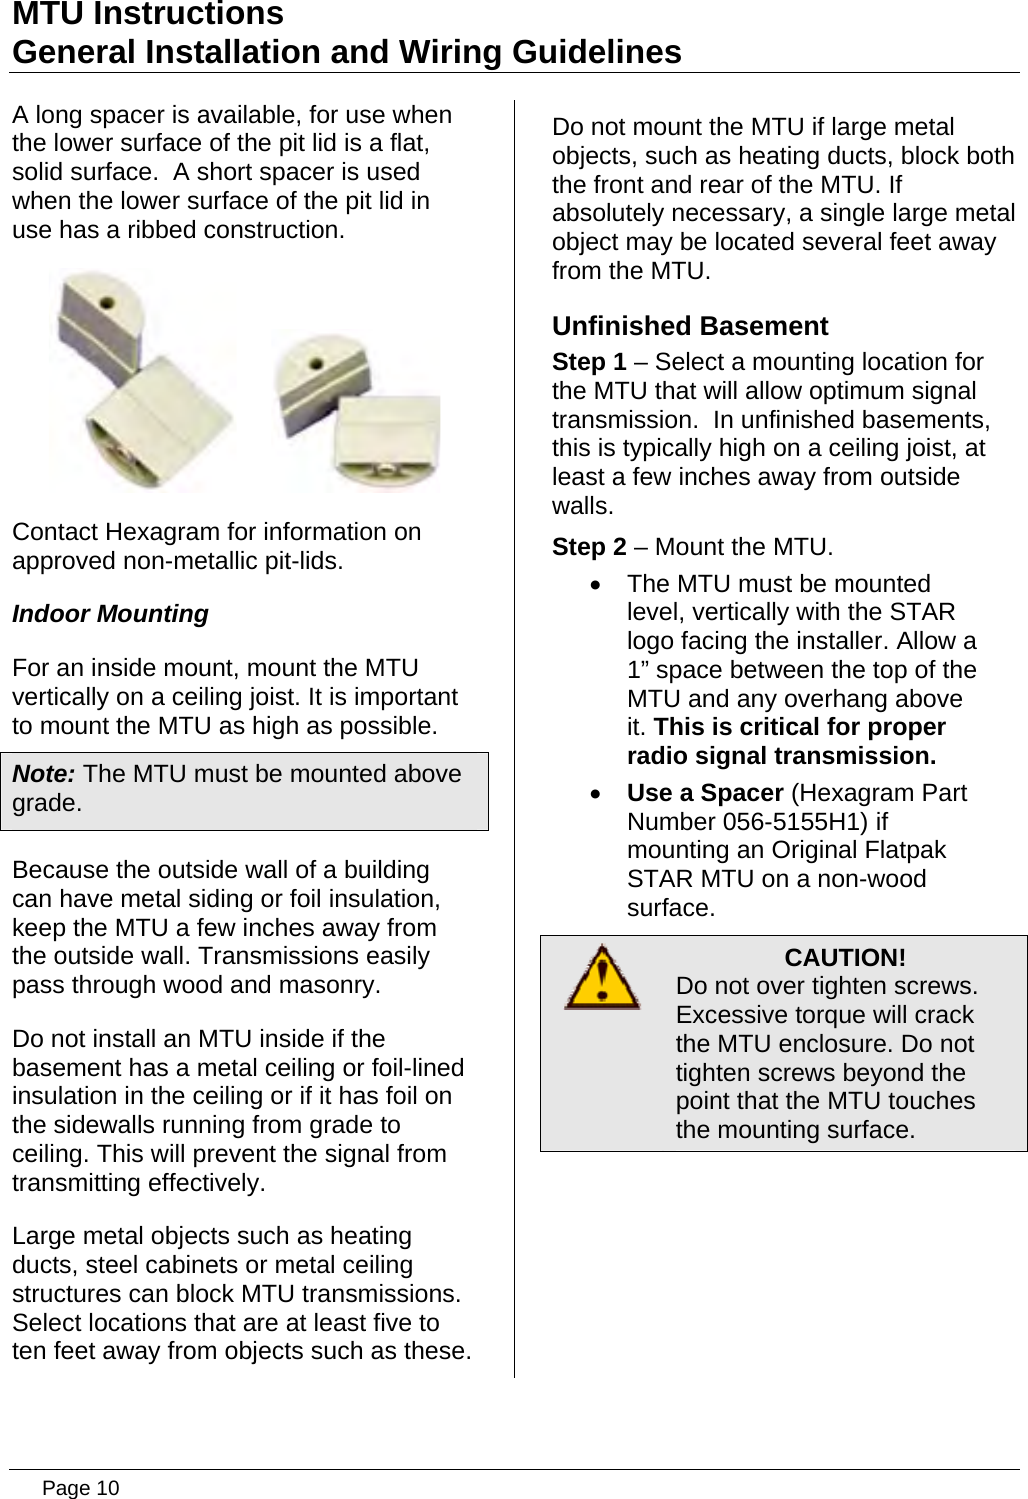 MTU Instructions General Installation and Wiring Guidelines A long spacer is available, for use when the lower surface of the pit lid is a flat, solid surface.  A short spacer is used when the lower surface of the pit lid in use has a ribbed construction.        Contact Hexagram for information on approved non-metallic pit-lids. Indoor Mounting For an inside mount, mount the MTU vertically on a ceiling joist. It is important to mount the MTU as high as possible. Note: The MTU must be mounted above grade. Because the outside wall of a building can have metal siding or foil insulation, keep the MTU a few inches away from the outside wall. Transmissions easily pass through wood and masonry. Do not install an MTU inside if the basement has a metal ceiling or foil-lined insulation in the ceiling or if it has foil on the sidewalls running from grade to ceiling. This will prevent the signal from transmitting effectively. Large metal objects such as heating ducts, steel cabinets or metal ceiling structures can block MTU transmissions. Select locations that are at least five to ten feet away from objects such as these. Do not mount the MTU if large metal objects, such as heating ducts, block both the front and rear of the MTU. If absolutely necessary, a single large metal object may be located several feet away from the MTU. Unfinished Basement Step 1 – Select a mounting location for the MTU that will allow optimum signal transmission.  In unfinished basements, this is typically high on a ceiling joist, at least a few inches away from outside walls. Step 2 – Mount the MTU. •  The MTU must be mounted level, vertically with the STAR logo facing the installer. Allow a 1” space between the top of the  MTU and any overhang above it. This is critical for proper radio signal transmission. • Use a Spacer (Hexagram Part Number 056-5155H1) if mounting an Original Flatpak STAR MTU on a non-wood surface.  CAUTION! Do not over tighten screws. Excessive torque will crack the MTU enclosure. Do not tighten screws beyond the point that the MTU touches the mounting surface.    Page 10